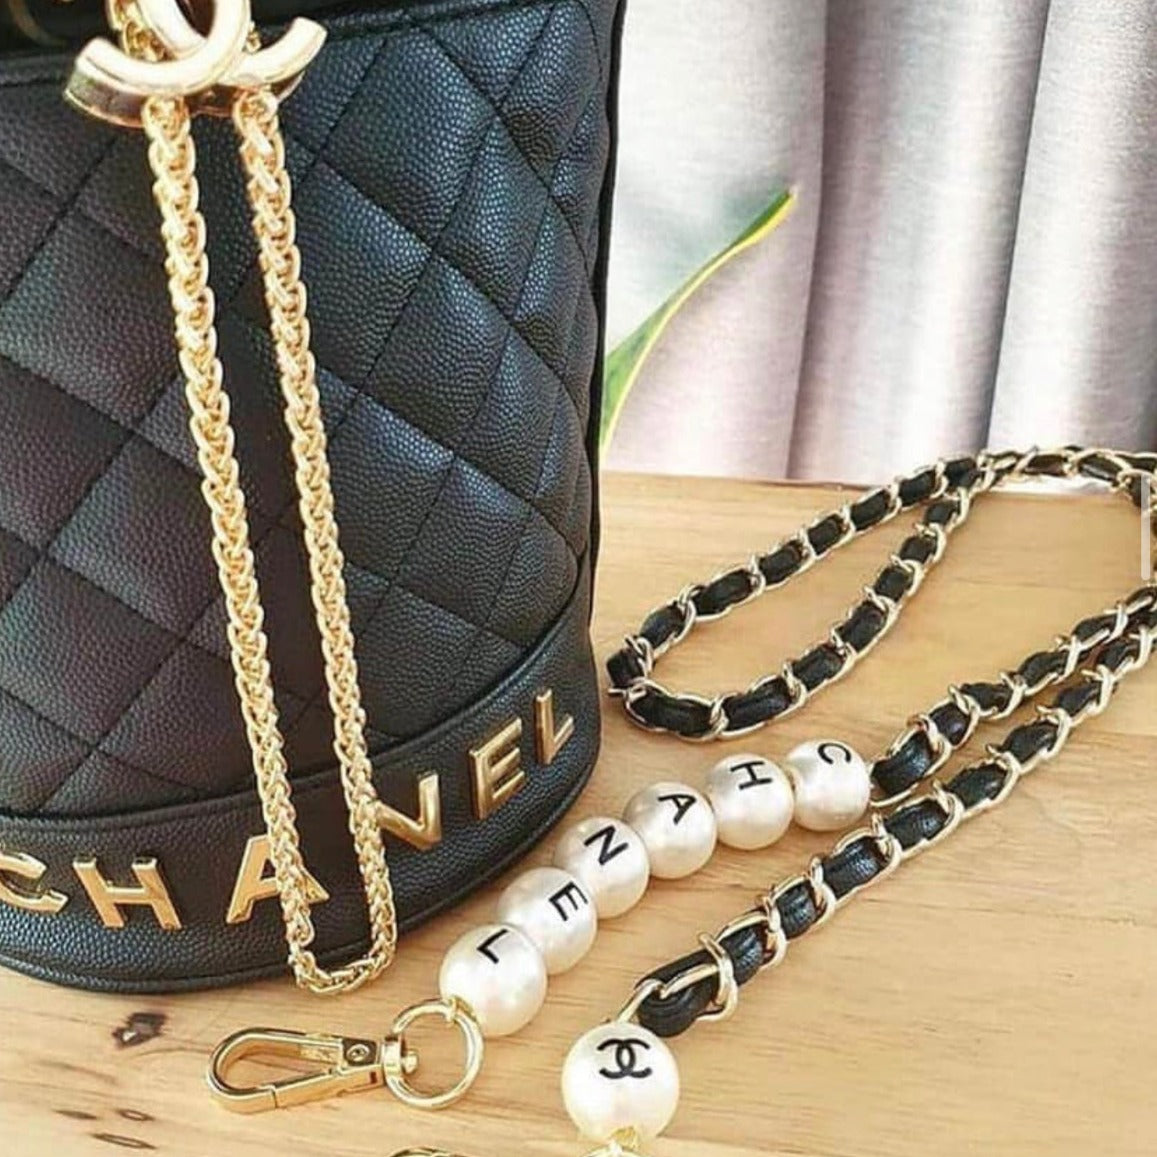 CHANEL Pearl Round Clutch with Chain - Bellisa